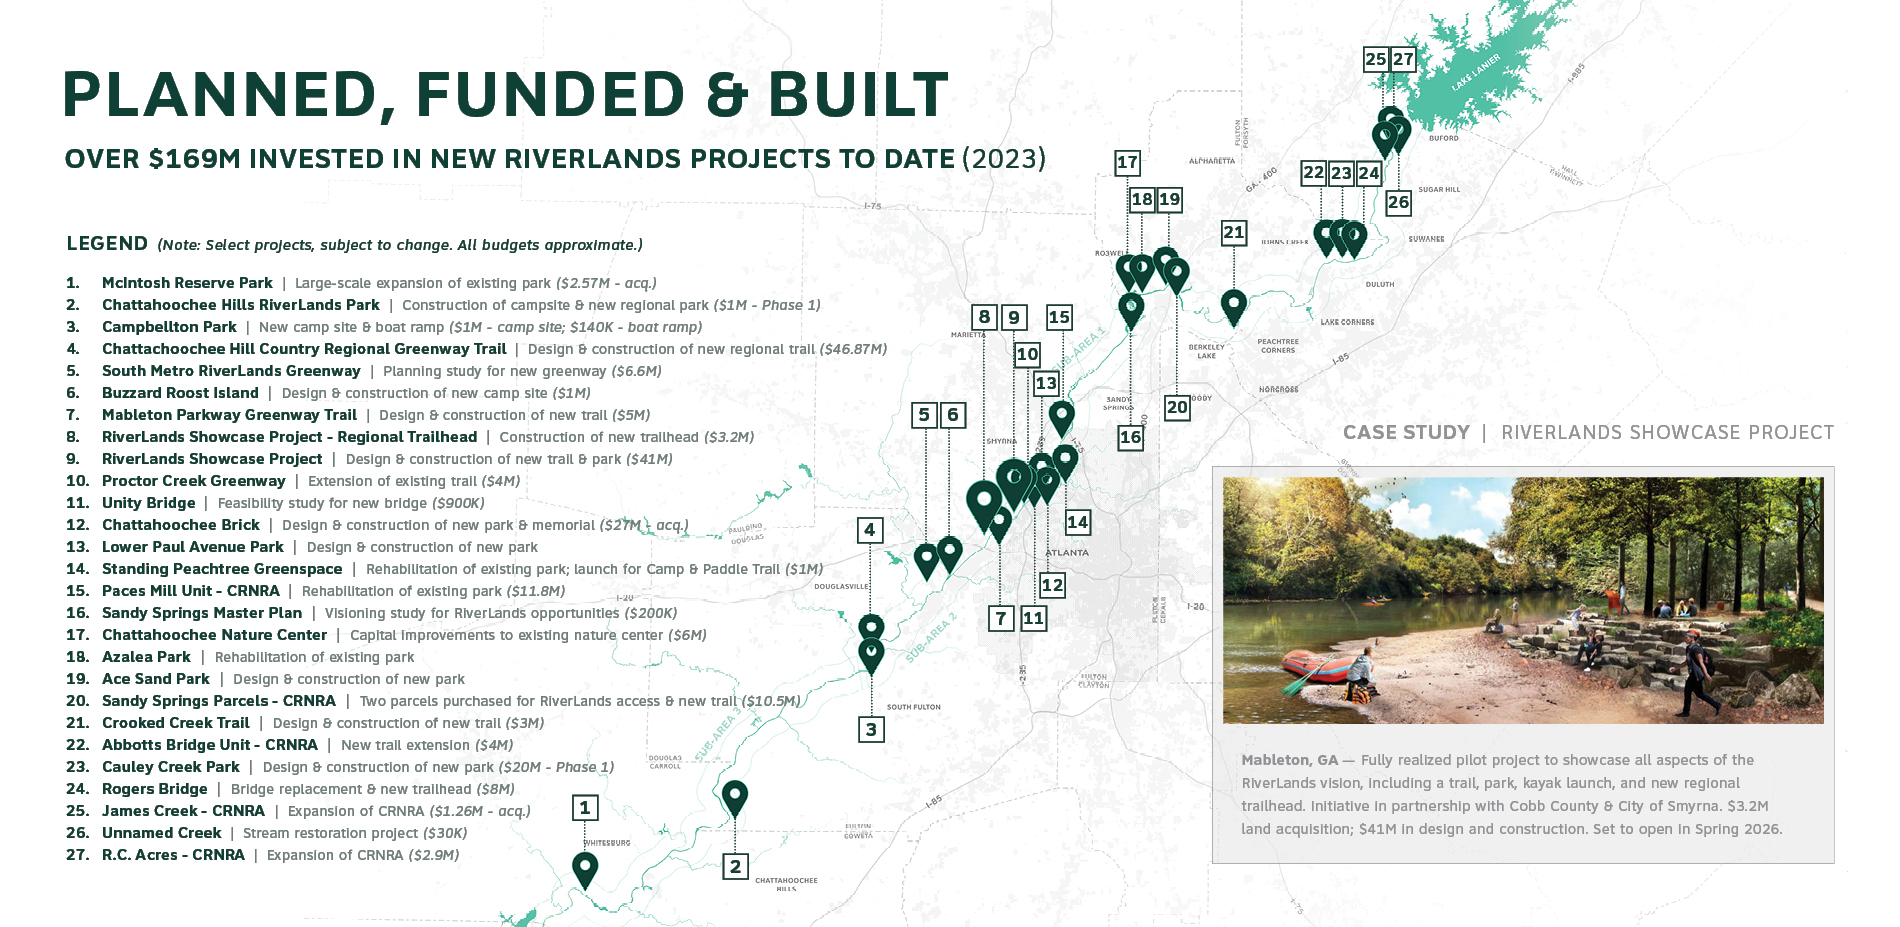 Planned, Funded & Built